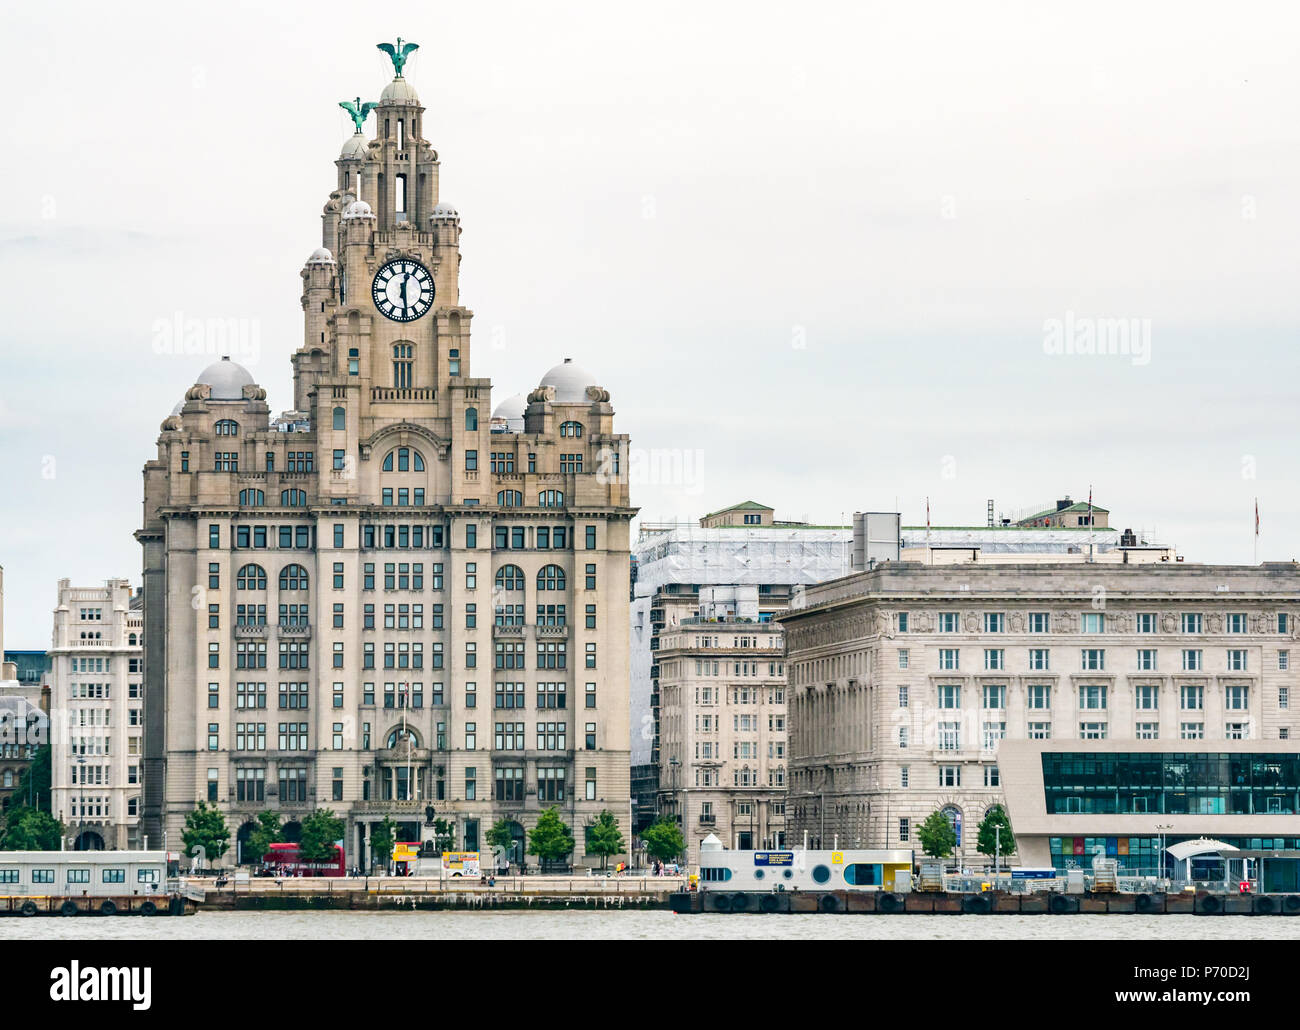 The Three Graces, Cunard Building and Royal Liver building, Pier Head, Liverpool, England, UK seen from River Mersey Stock Photo